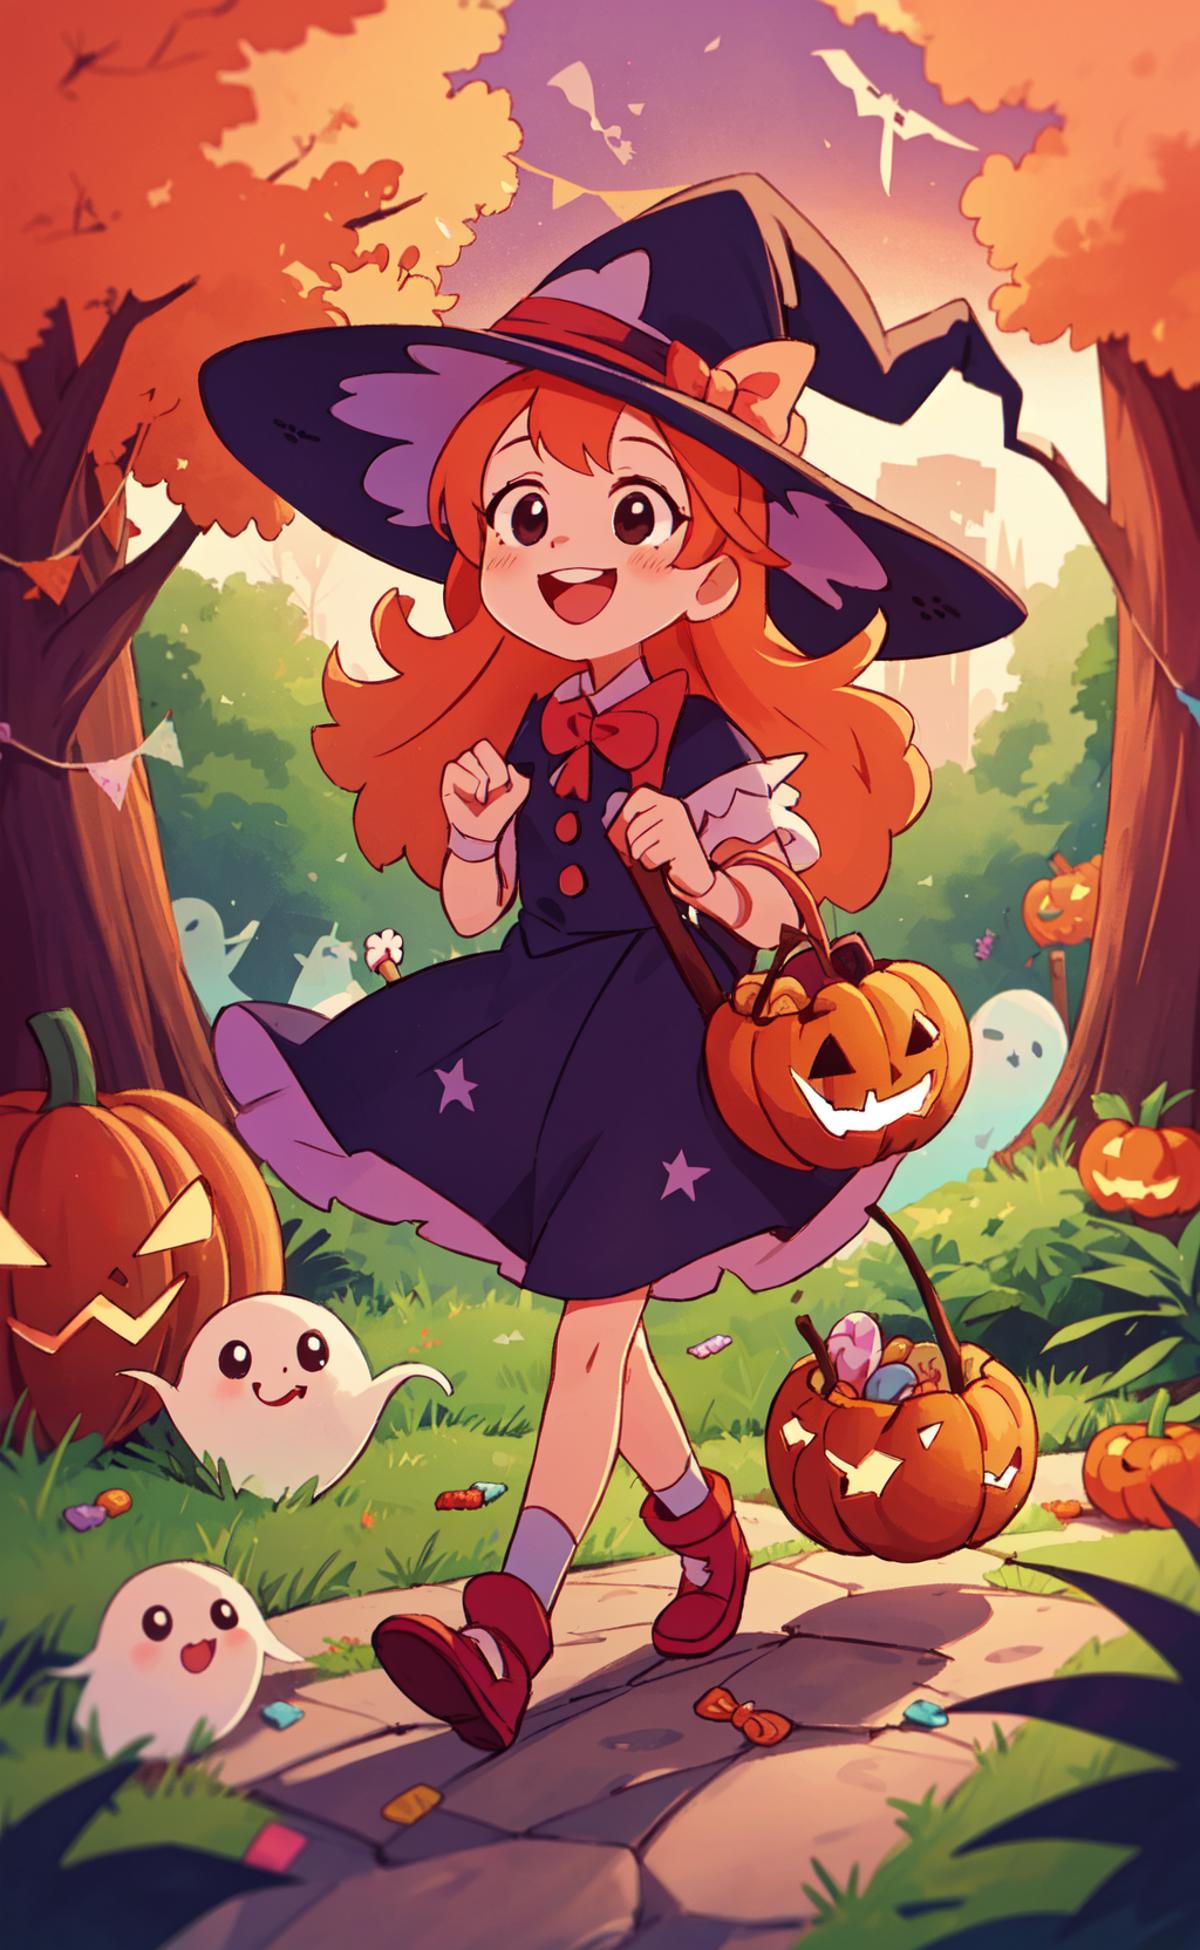 A young girl is holding a pumpkin-shaped bag and a giant pumpkin bag while walking through a forest filled with pumpkins, ghosts, and other seasonal decorations.